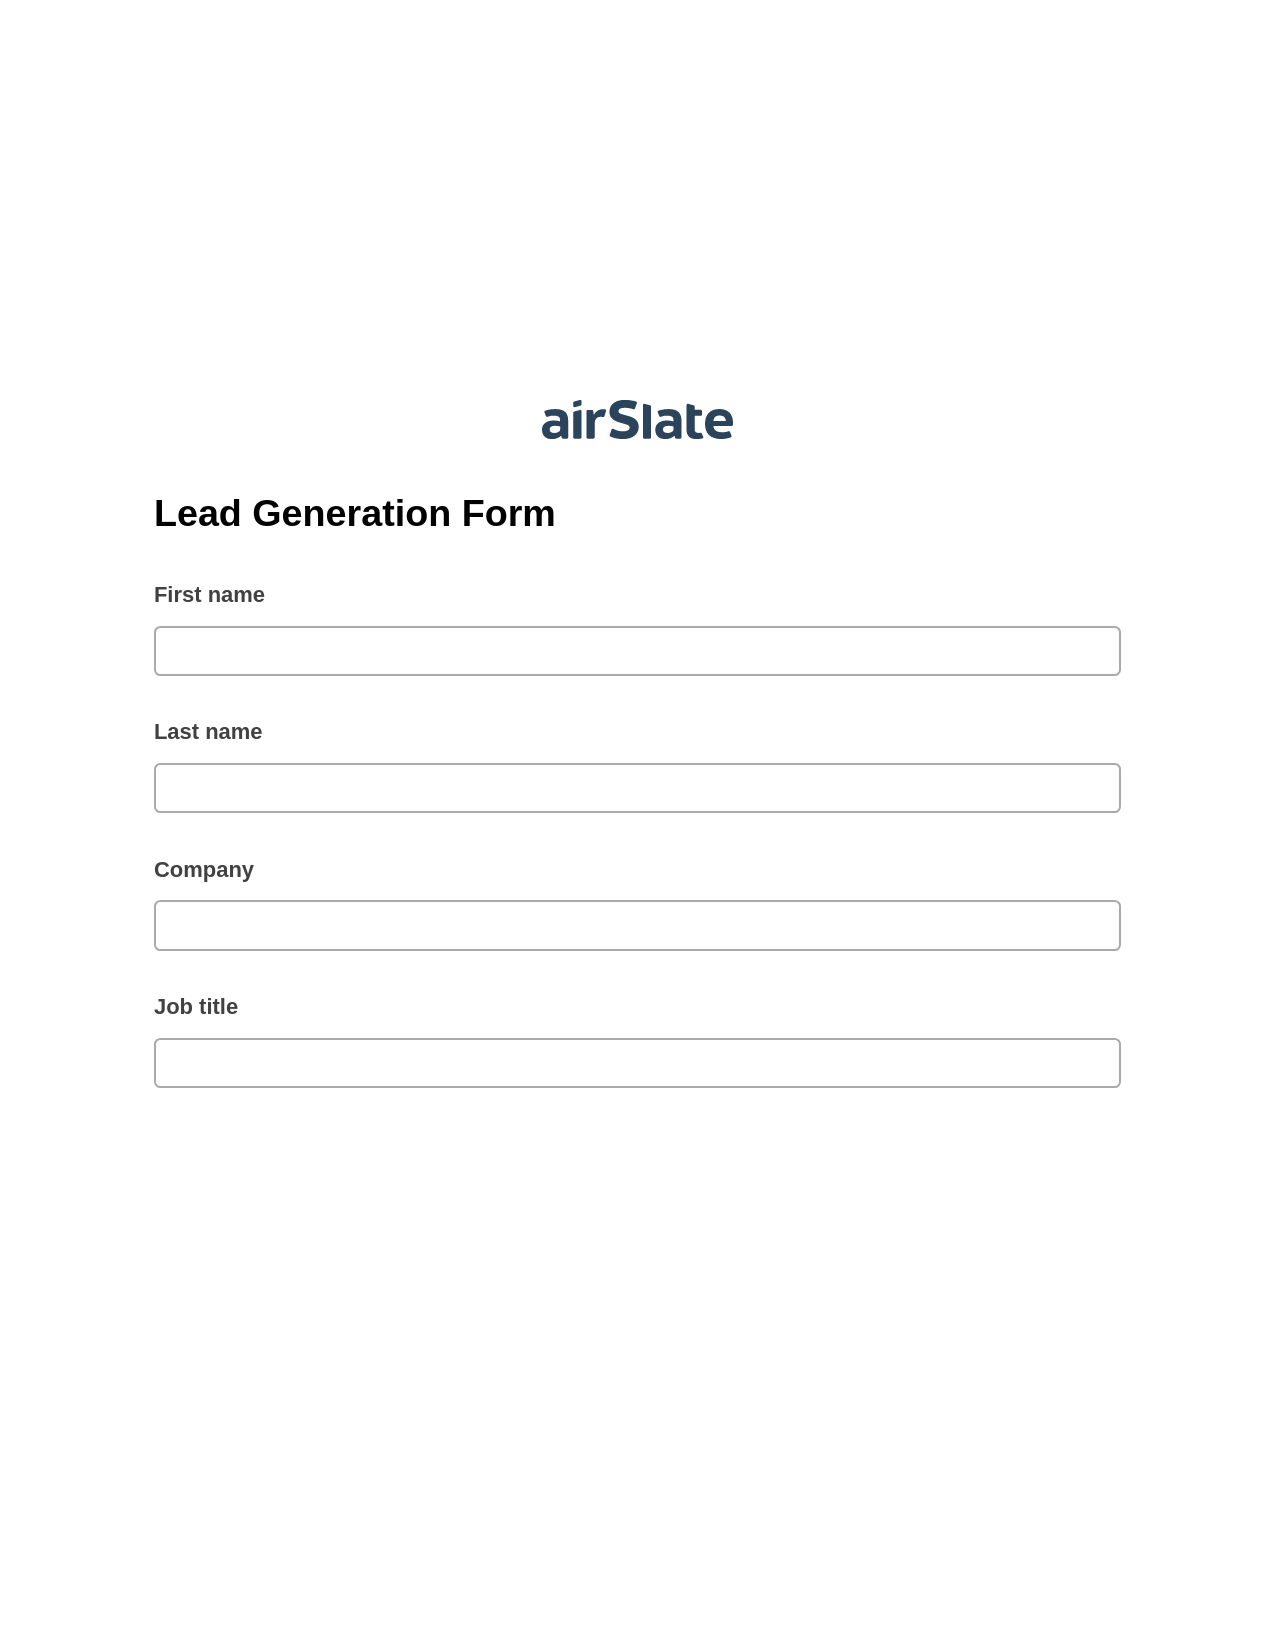 Lead Generation Form Pre-fill from Salesforce Records Bot, Send a Slate with Roles Bot, Export to WebMerge Bot